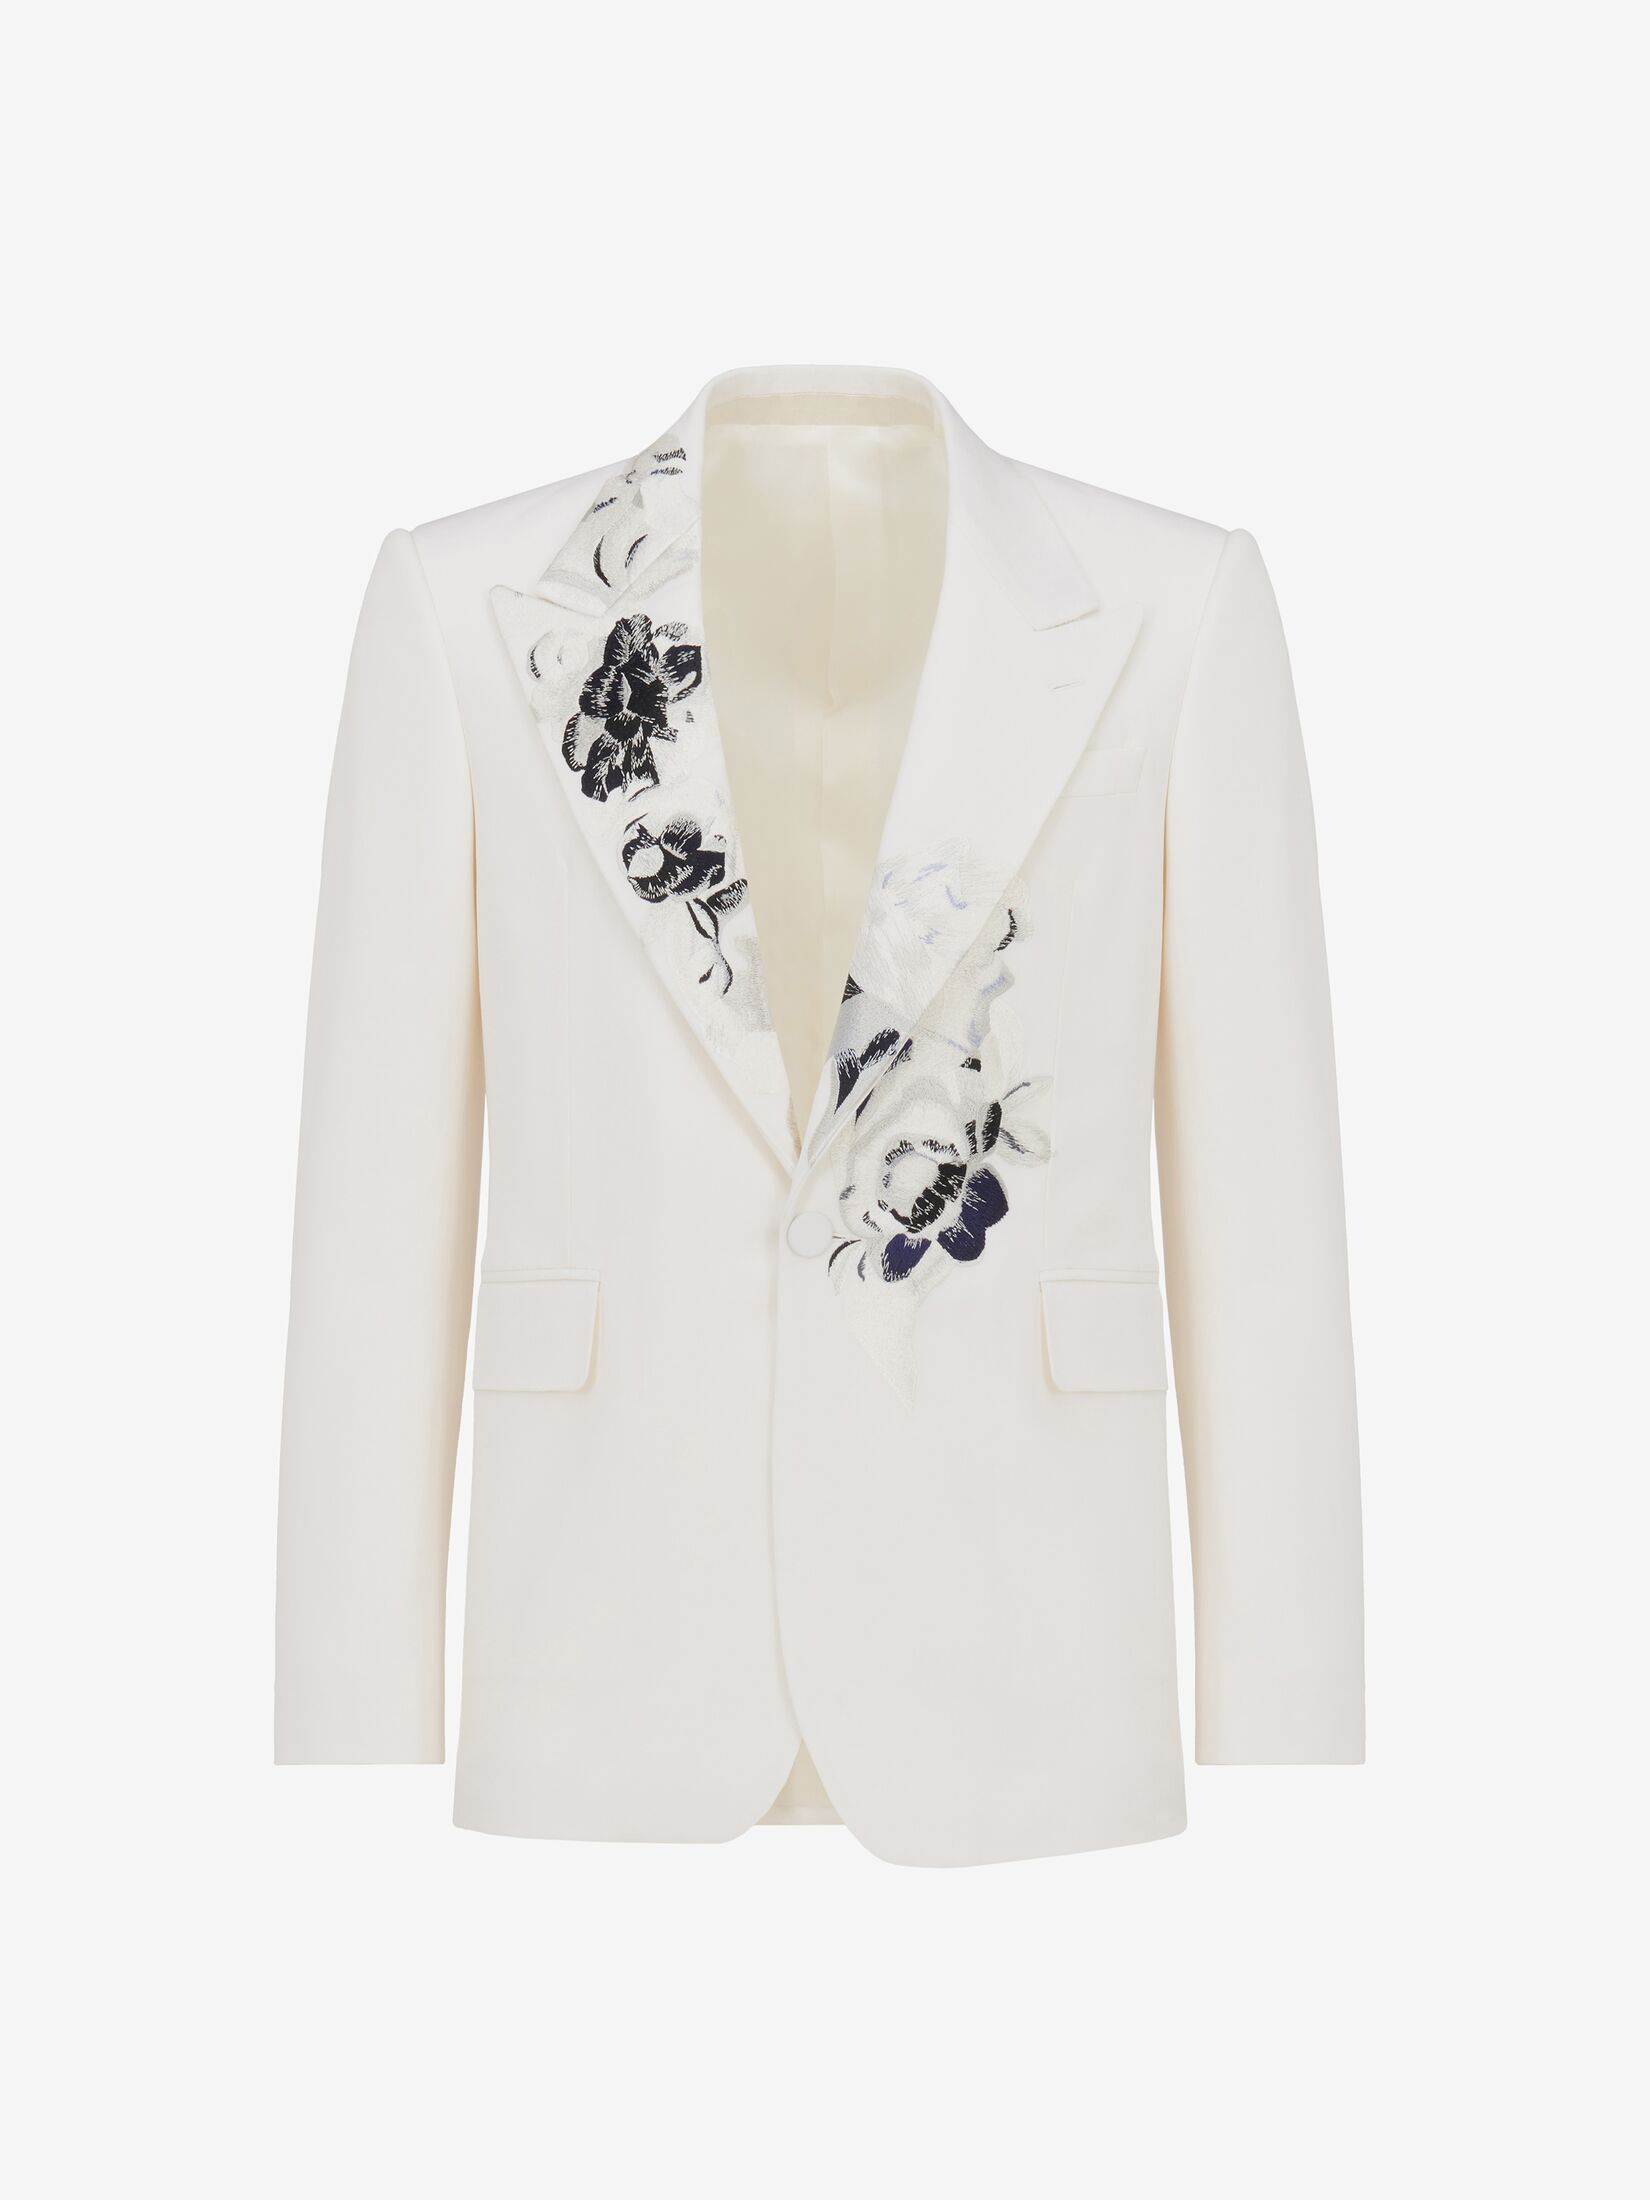 Dutch Flower Double-breasted Jacket in Black/White | Alexander 